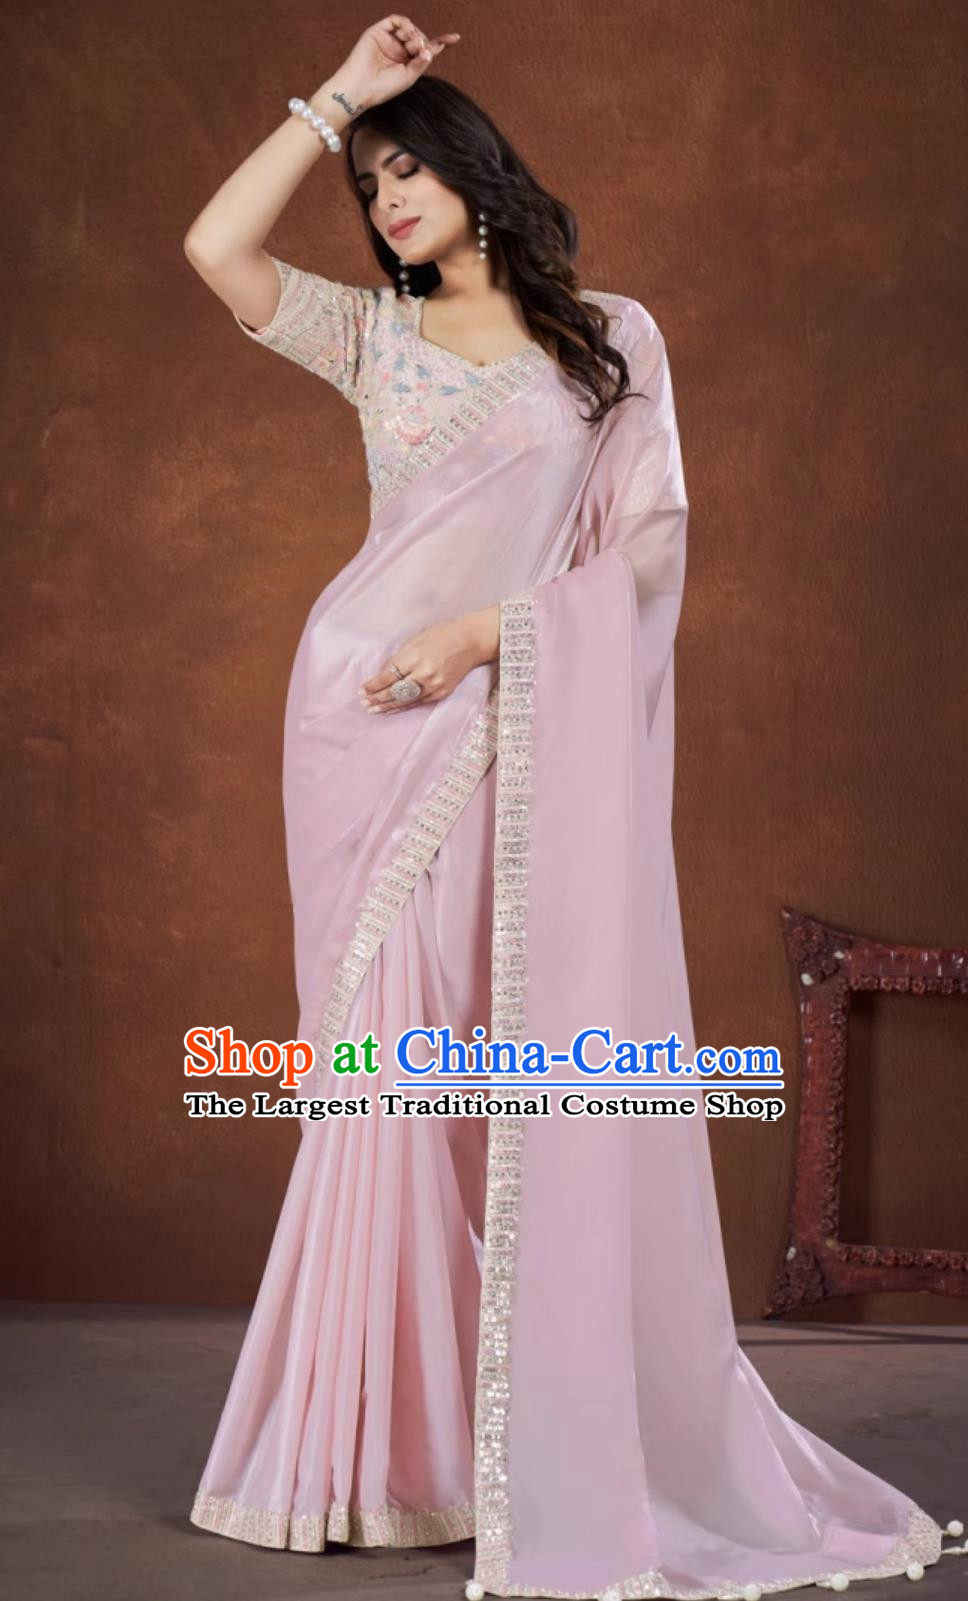 Light Pink Embroidered National Indian Saree With Diamonds Features Traditional Festival Party Women Wrap Skirt Sari